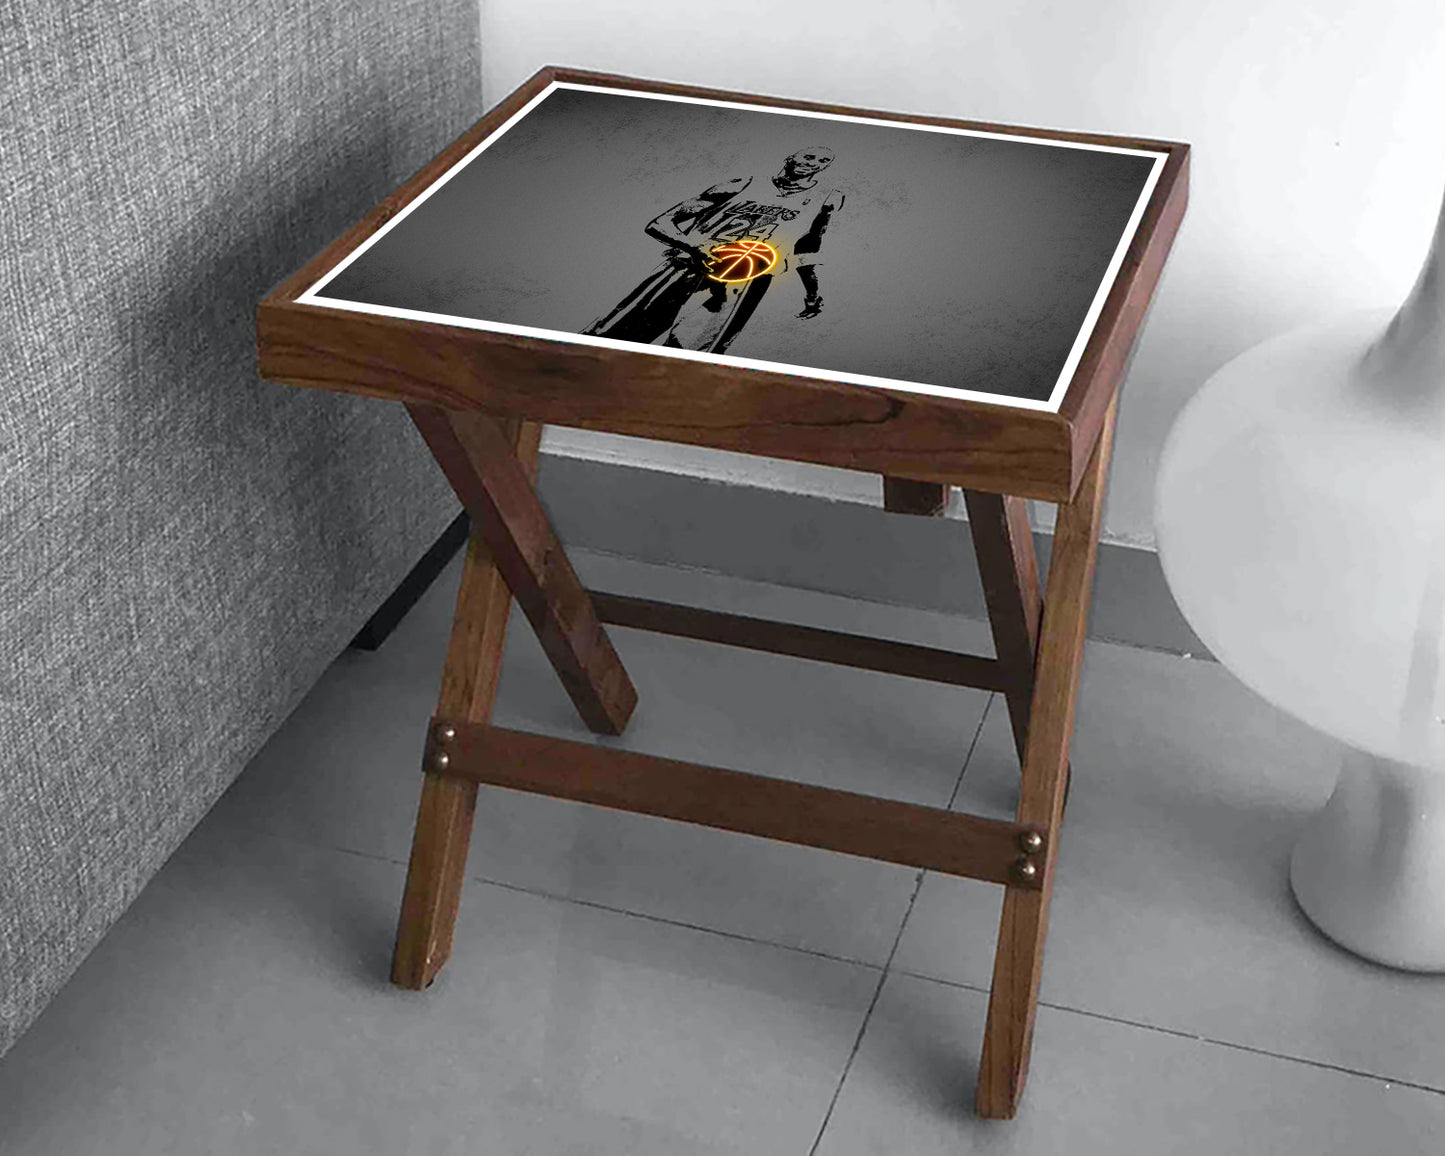 Kobe Bryant Neon Effect Coffee and Laptop Table 